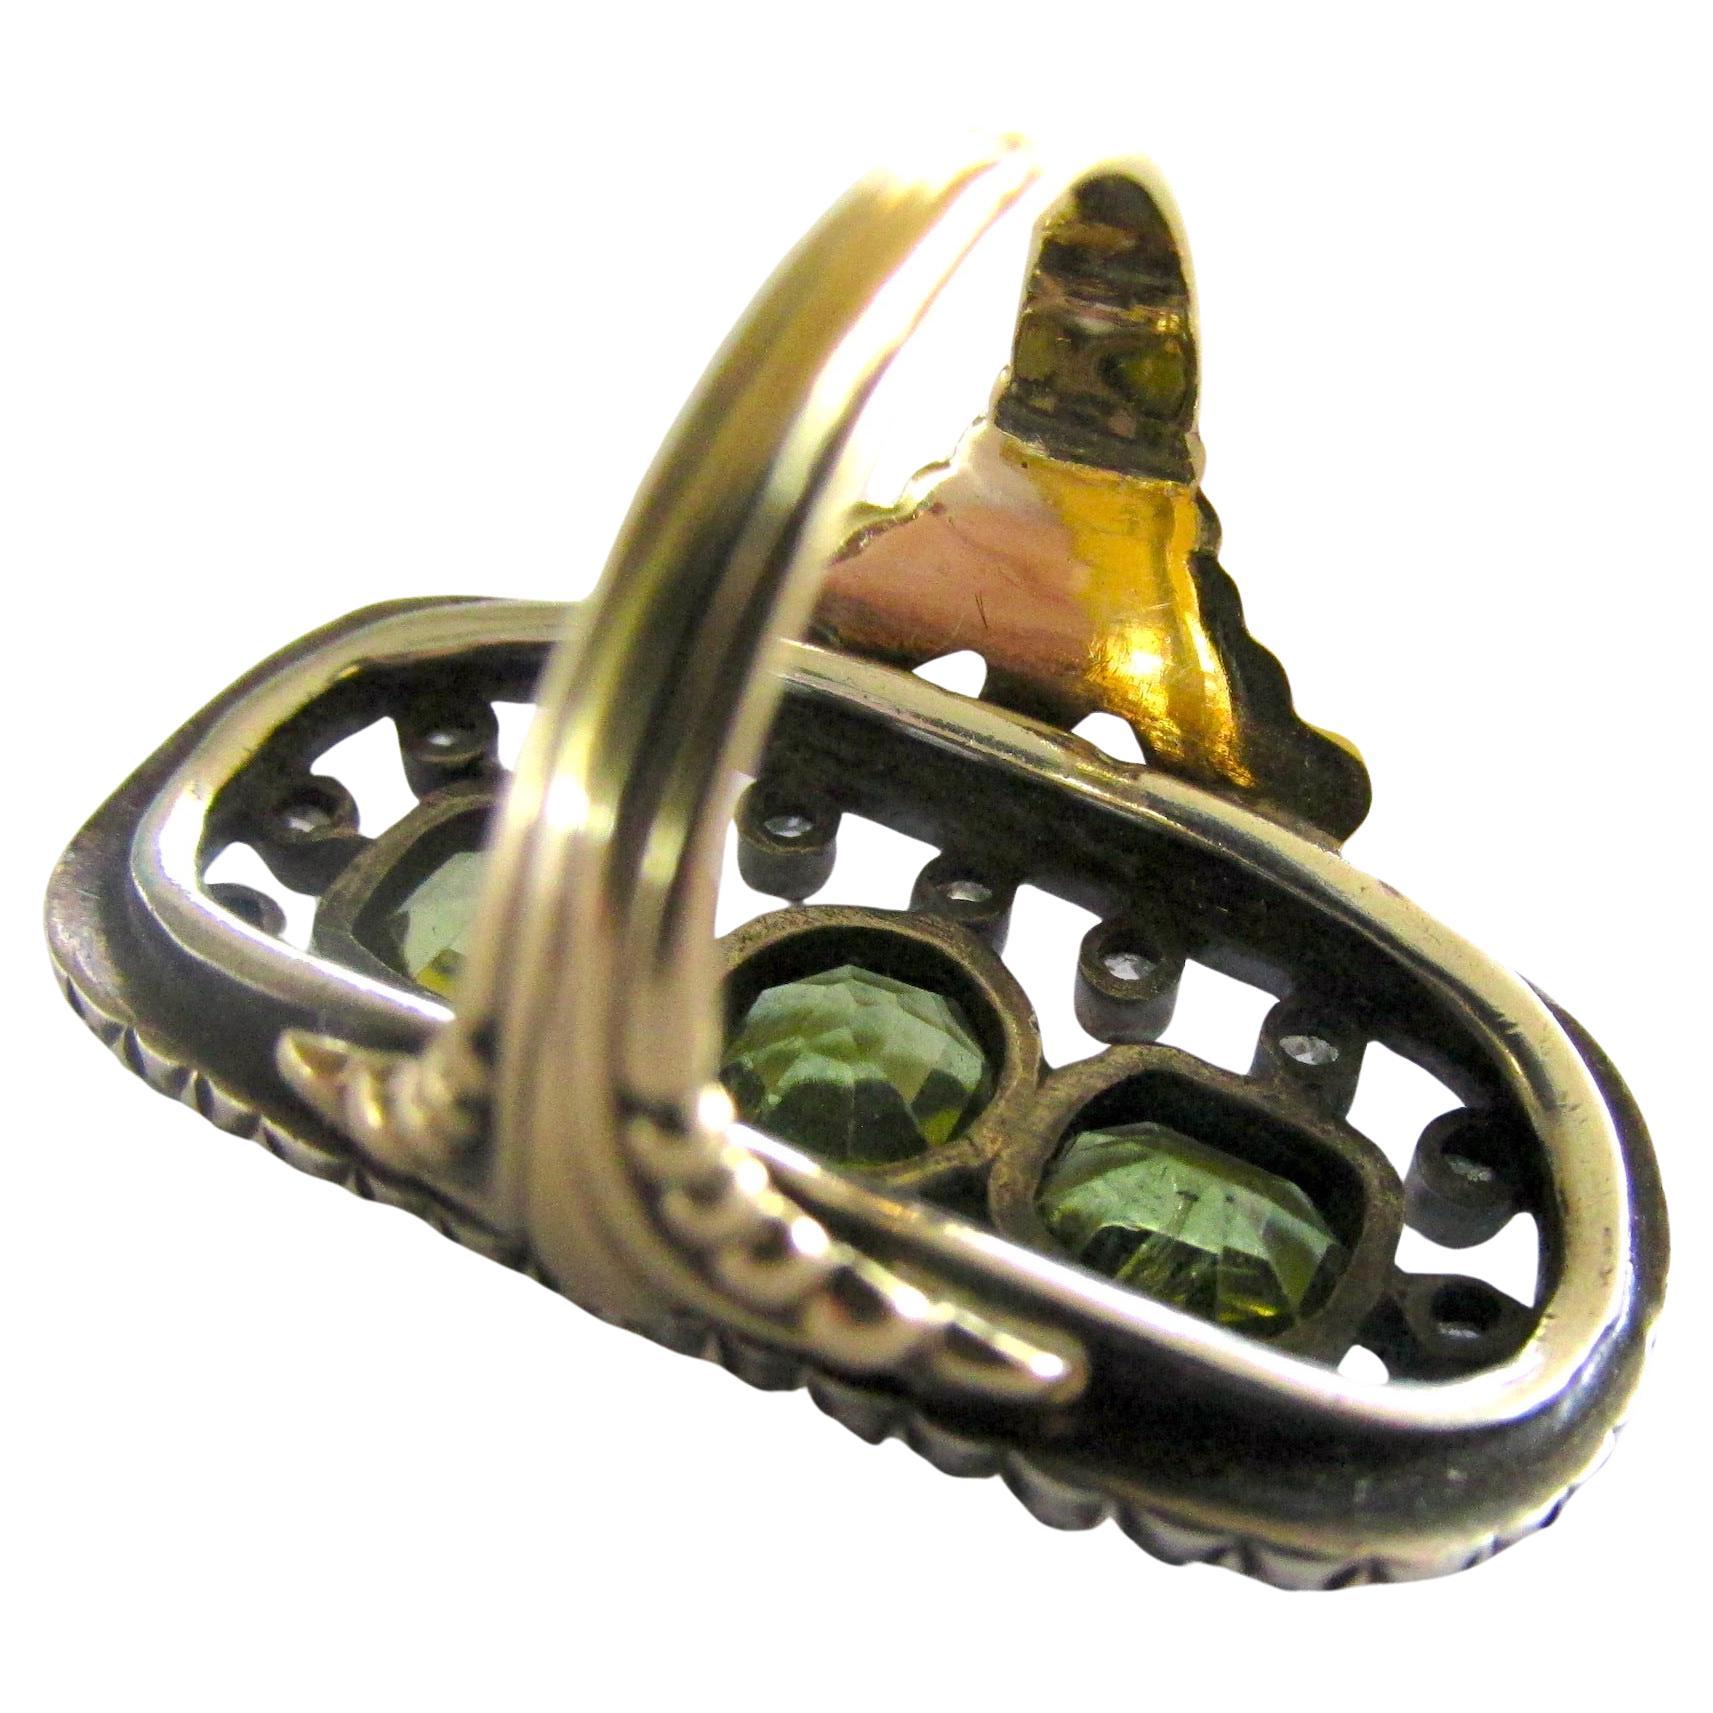 Bold mid 19th century peridot and rose diamond ring set in 18K gold and silver with an ornate shank. Peridots are prized for their yellow greenish color. The ancient Egyptians mined peridot on the Red Sea island of Zabargad, the source for many